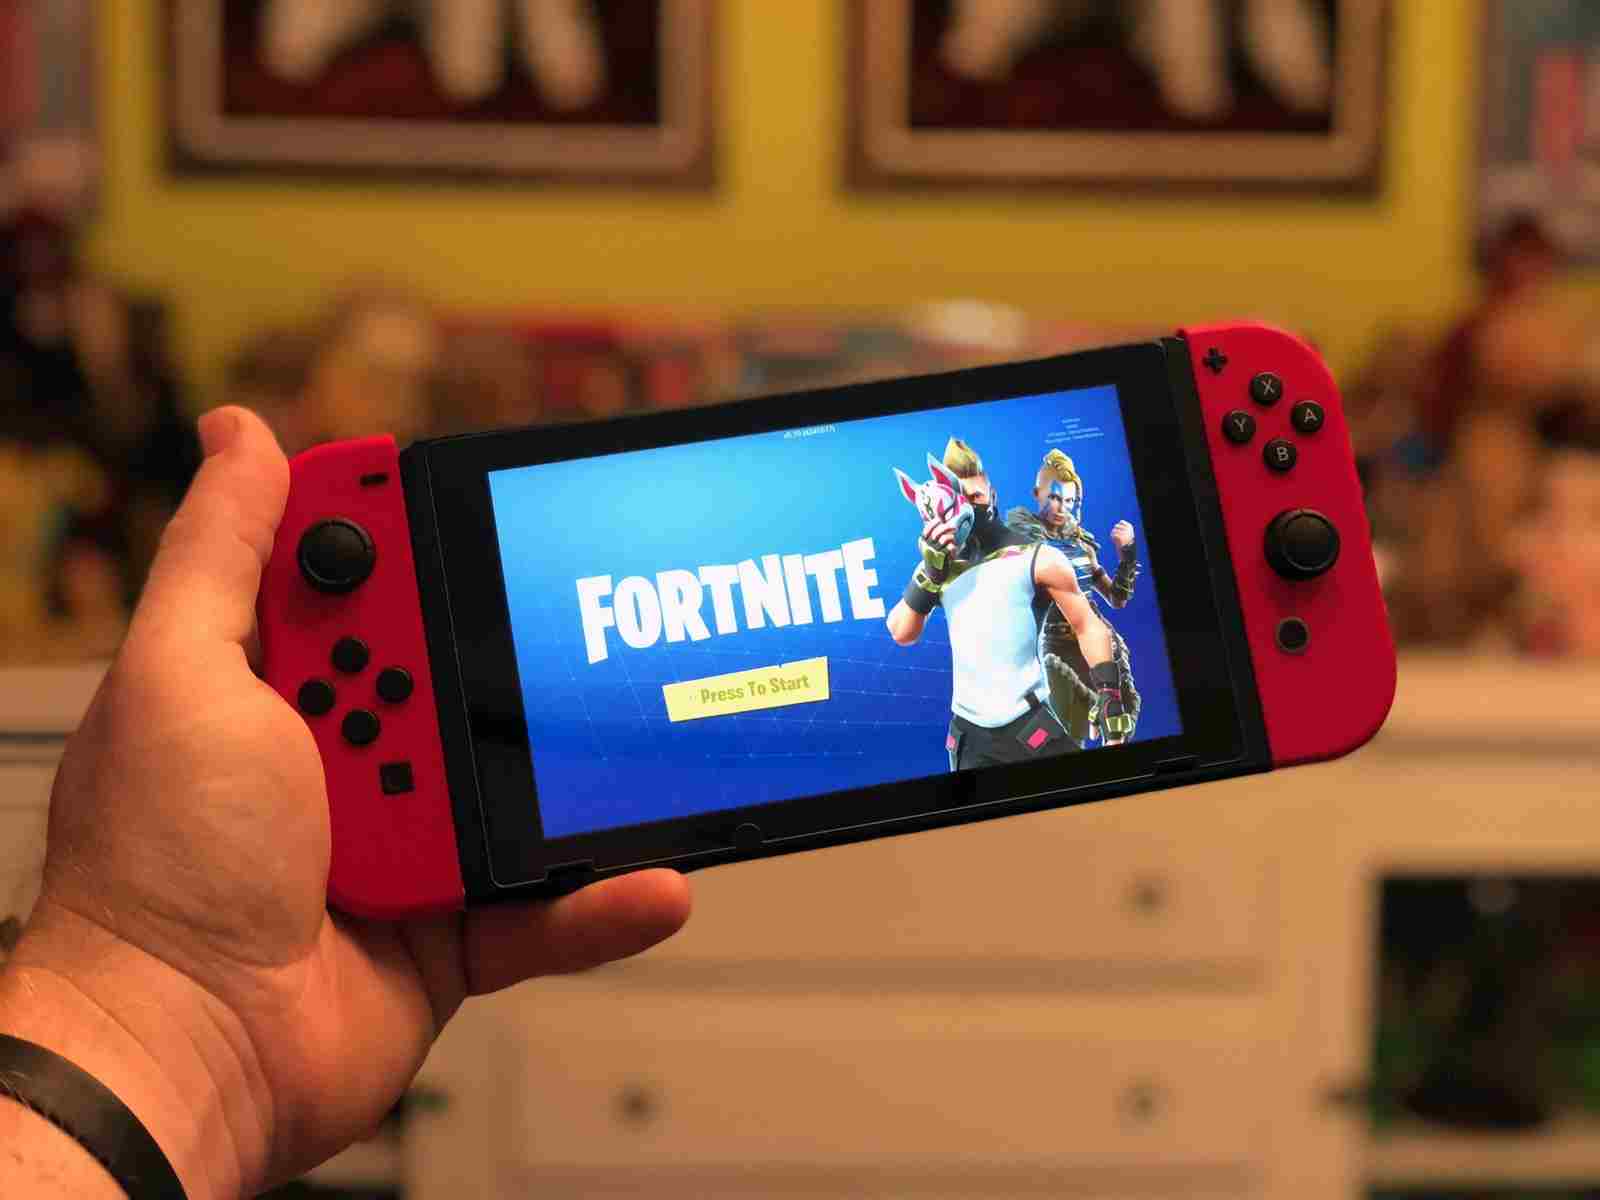 How to turn off motion control on Nintendo Switch Fortnite